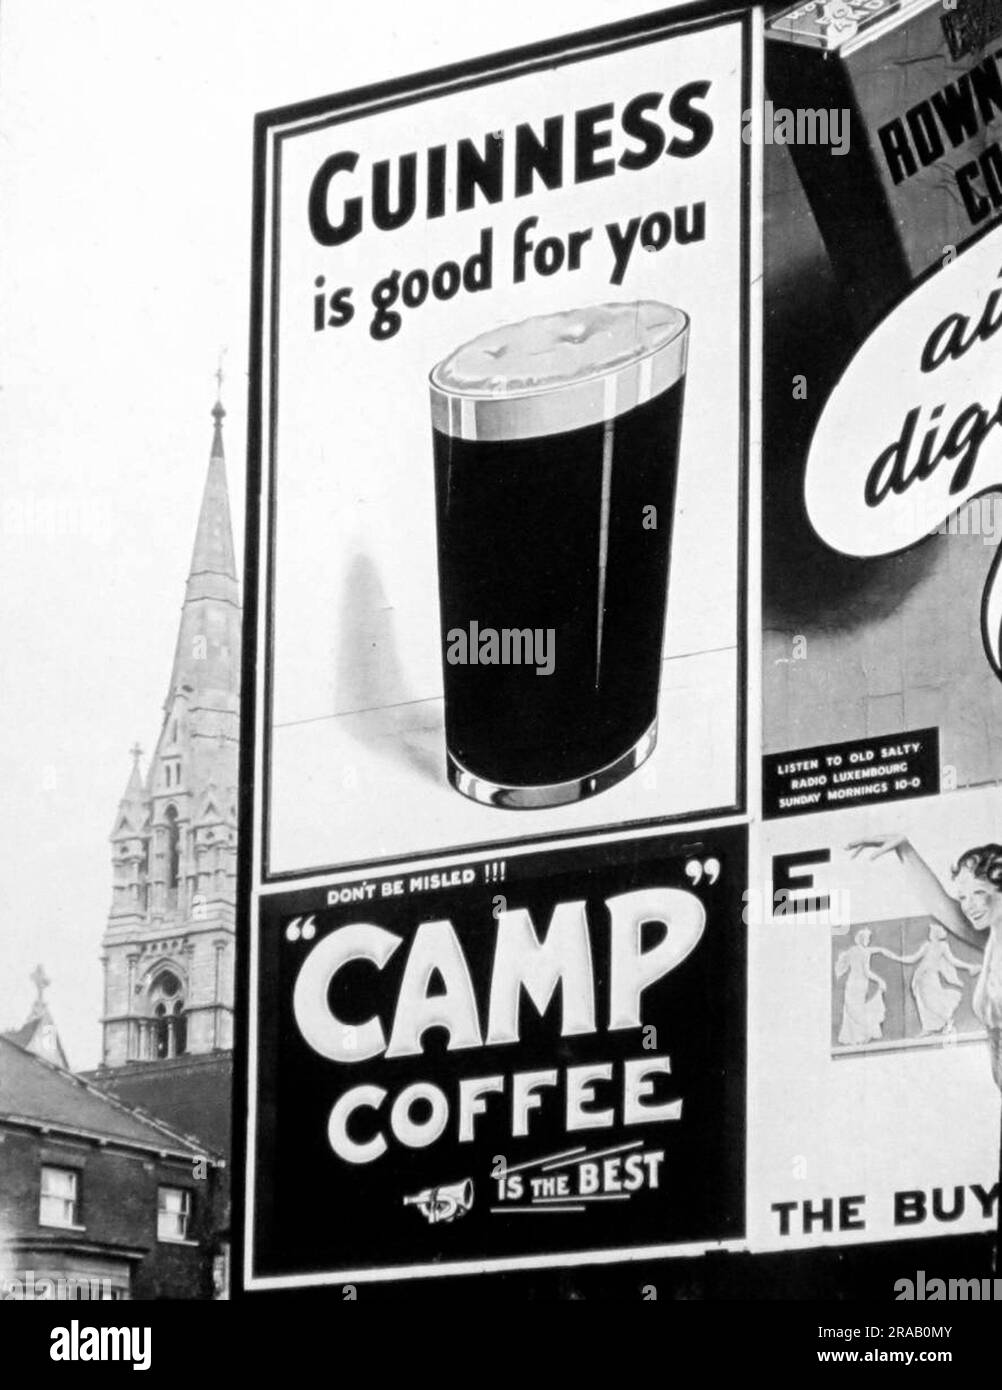 Advertising hoarding for Guinness and Camp Coffee, possibly 1930s Stock Photo